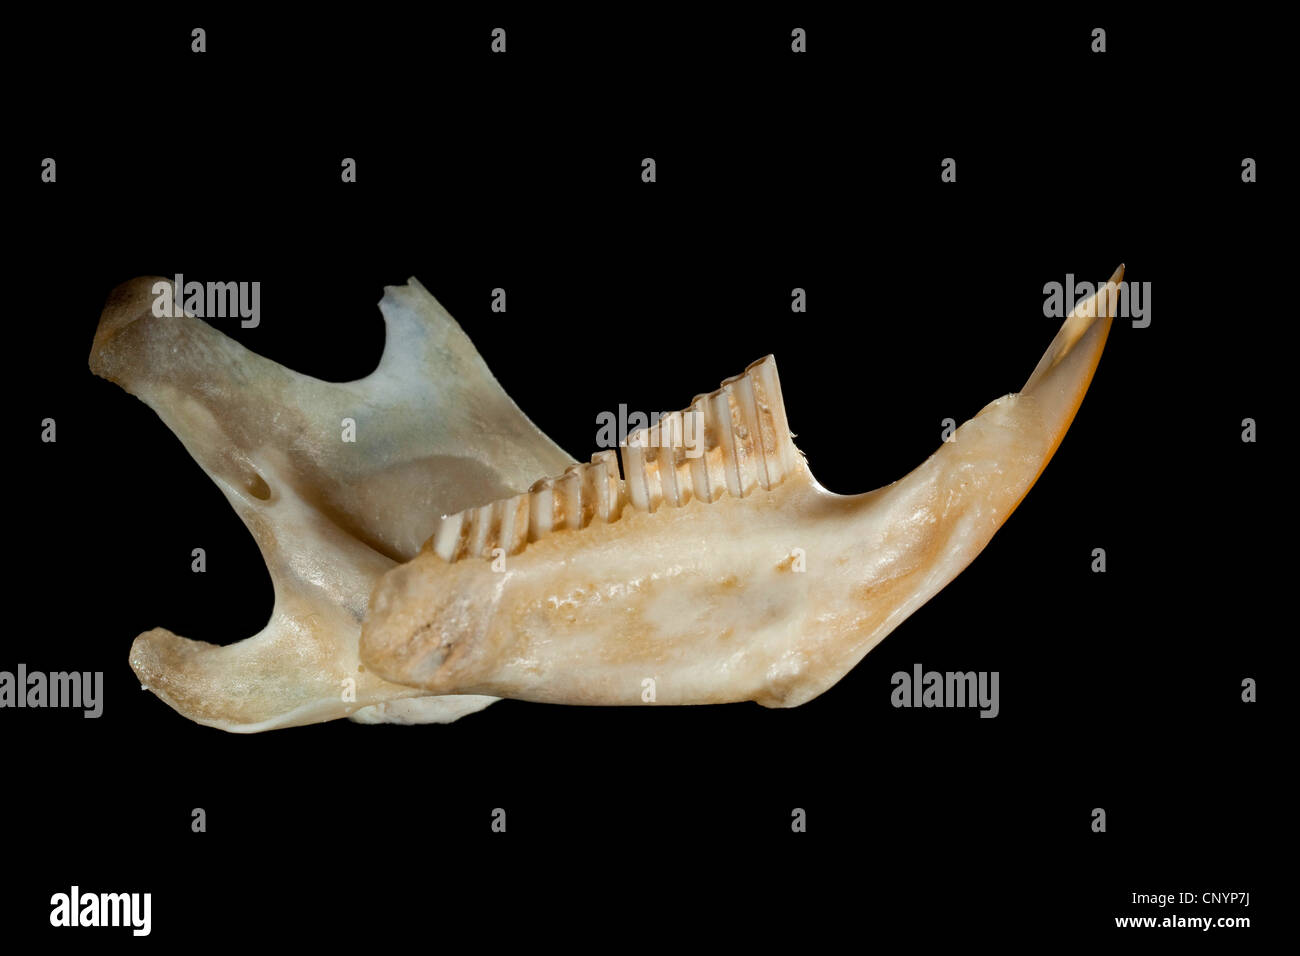 Barn owl (Tyto alba), lower jaw of a mouse, undigested food residue from a pellet Stock Photo